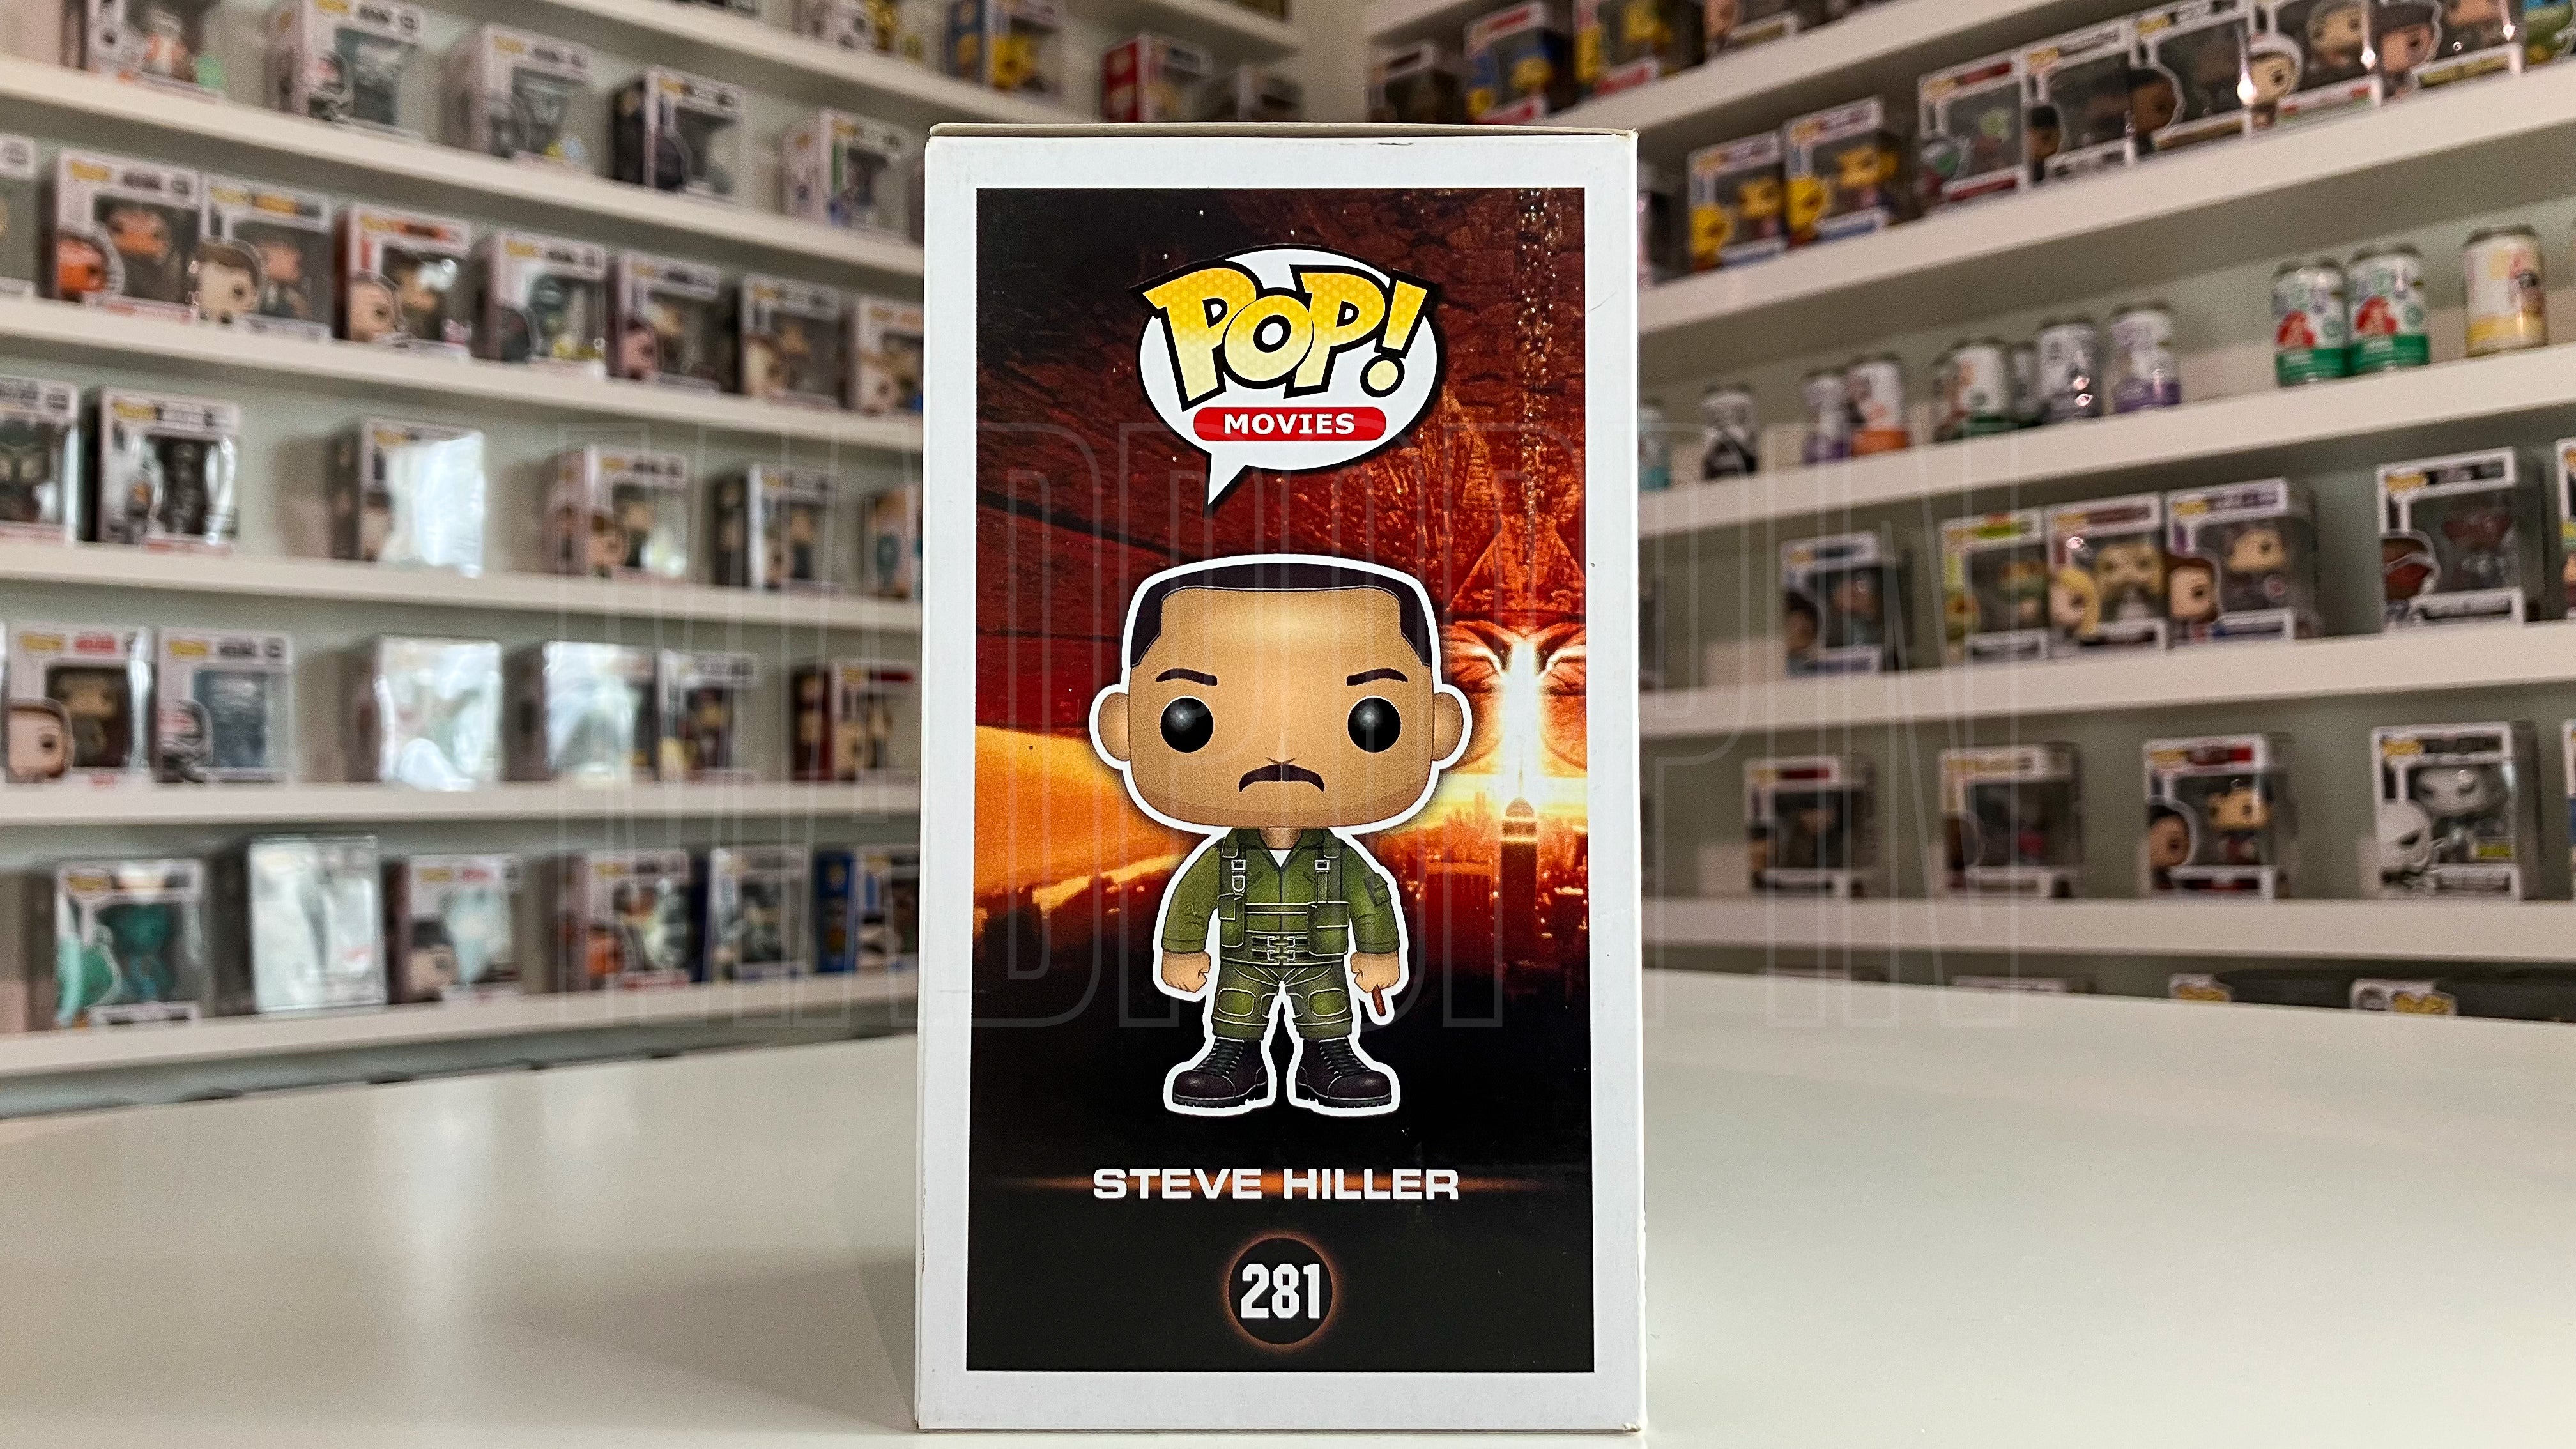 Funko Pop Movies Independence Day Steve Hiller Vaulted 281